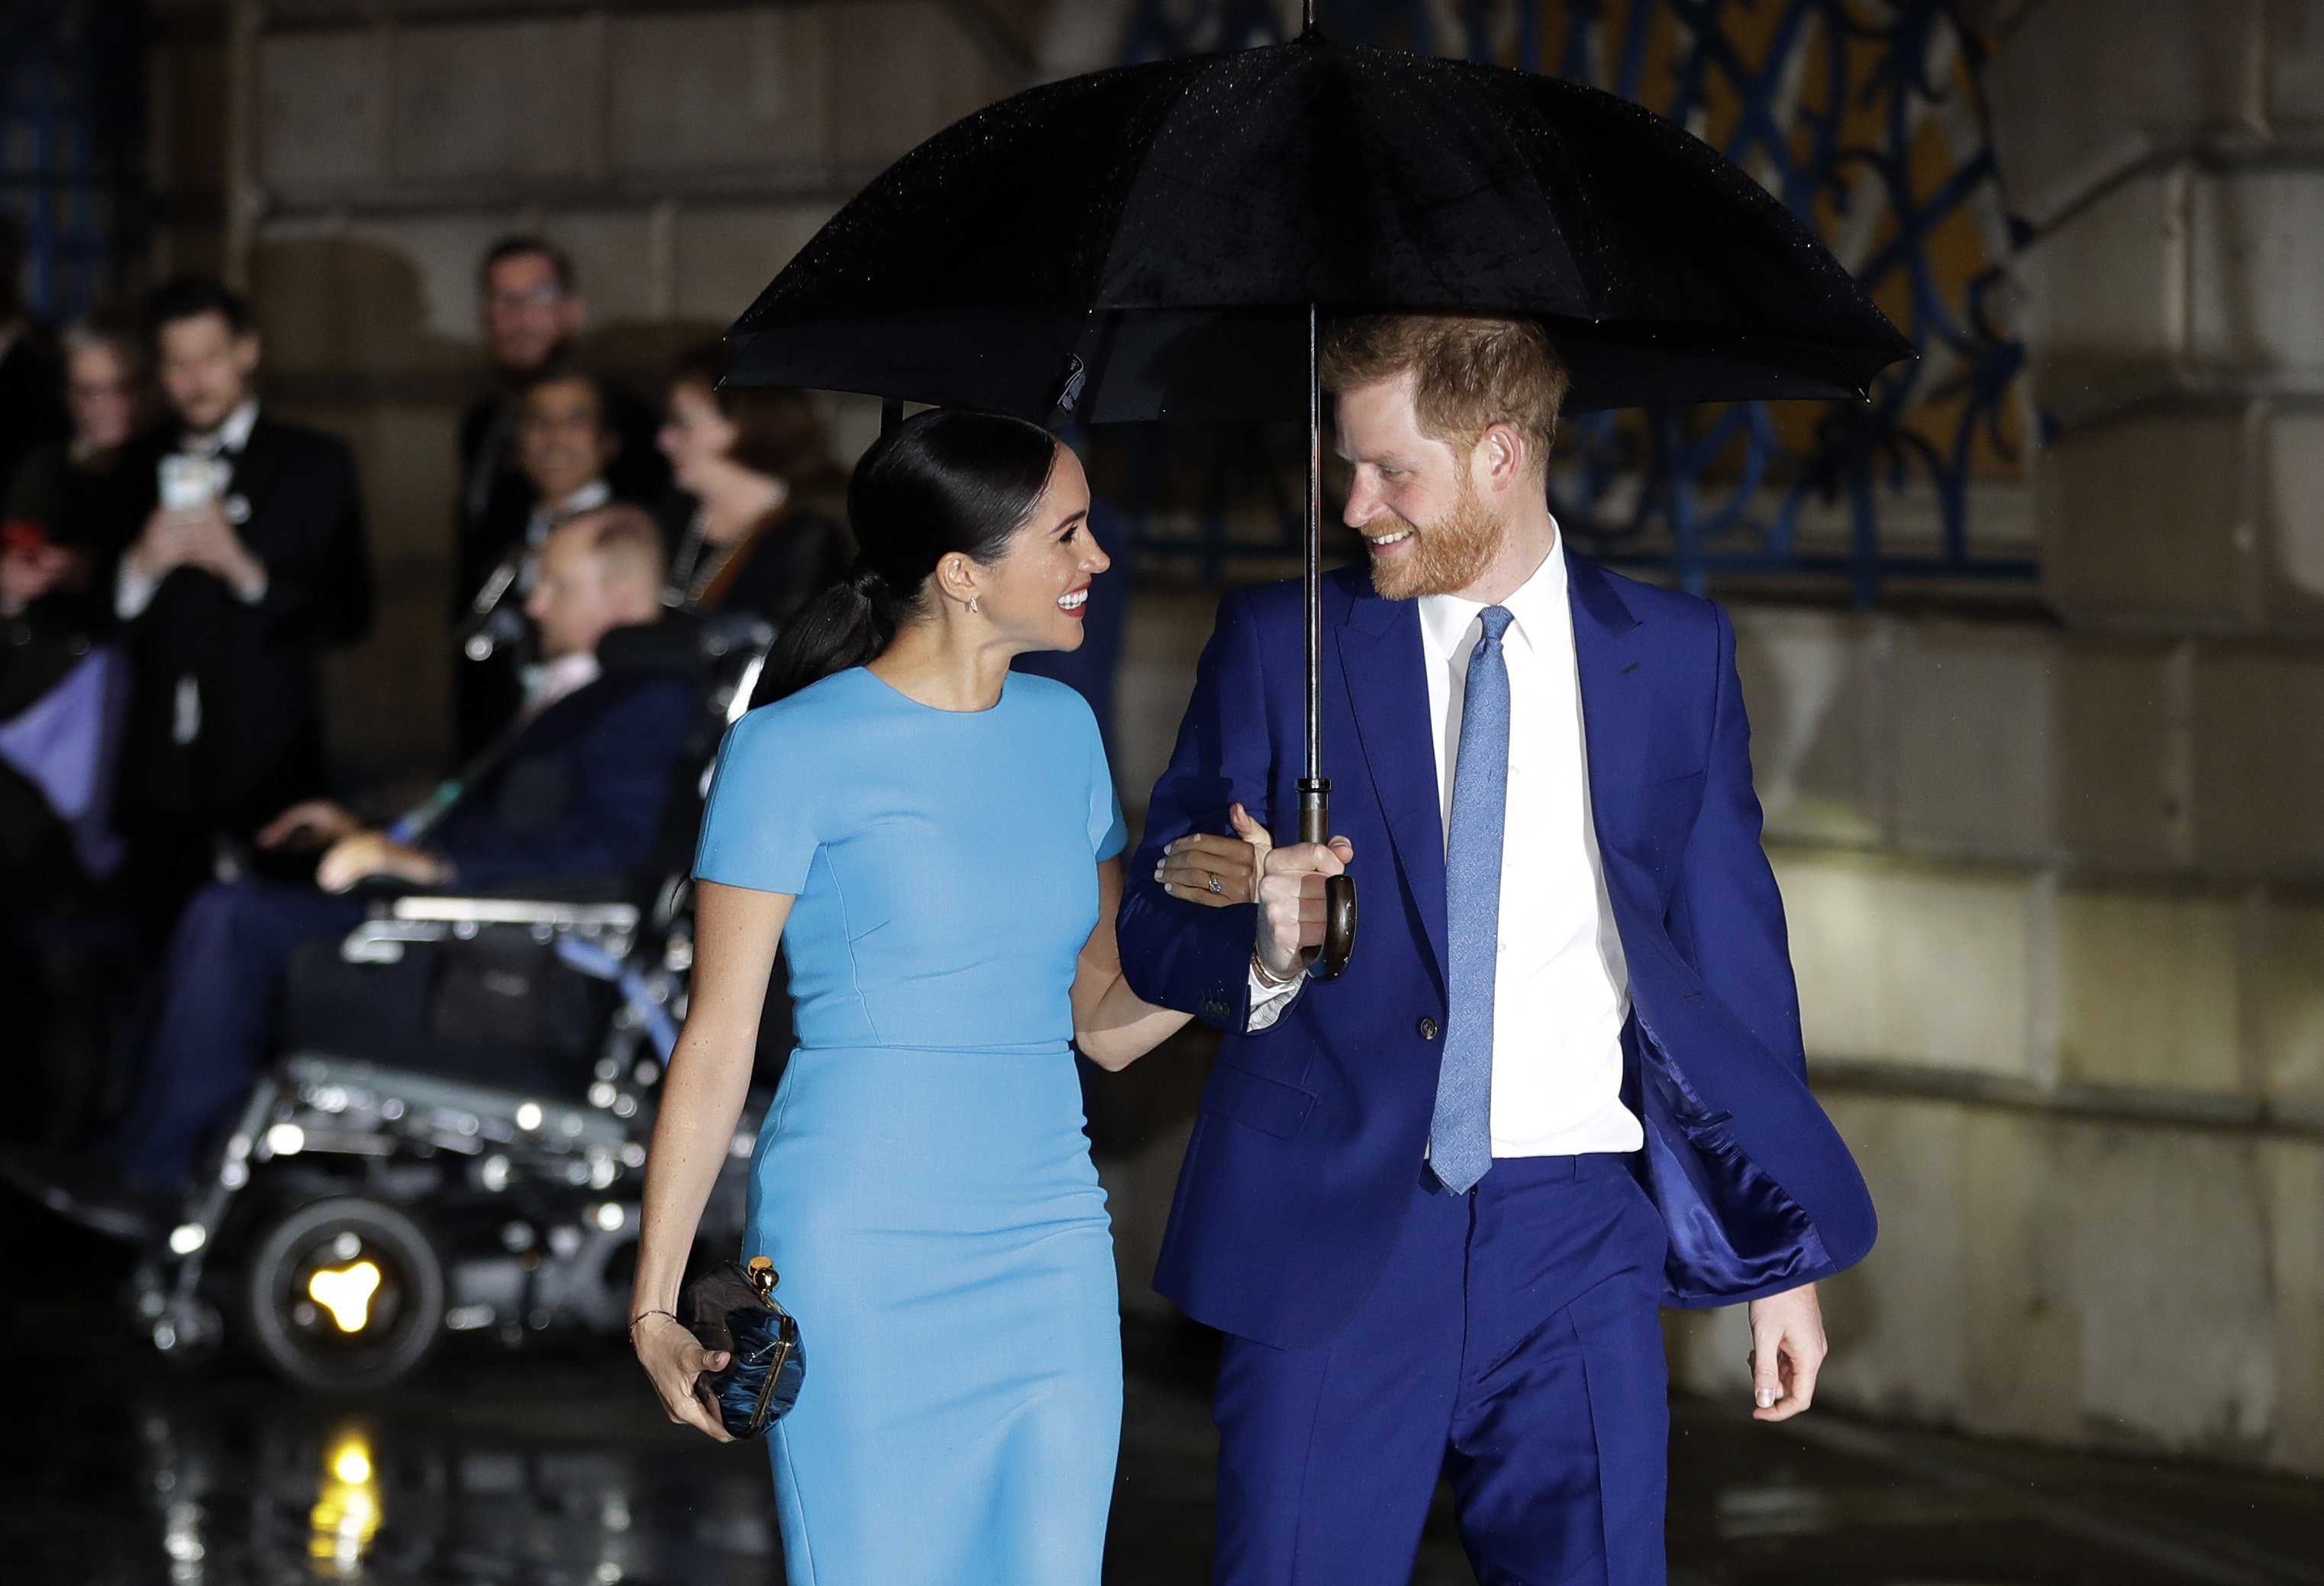 Alone together? After revelations and accusations made in front of a worldwide TV audience, will Prince Harry and Meghan Markle remain outside the royal family for good? Photo: AP Photo